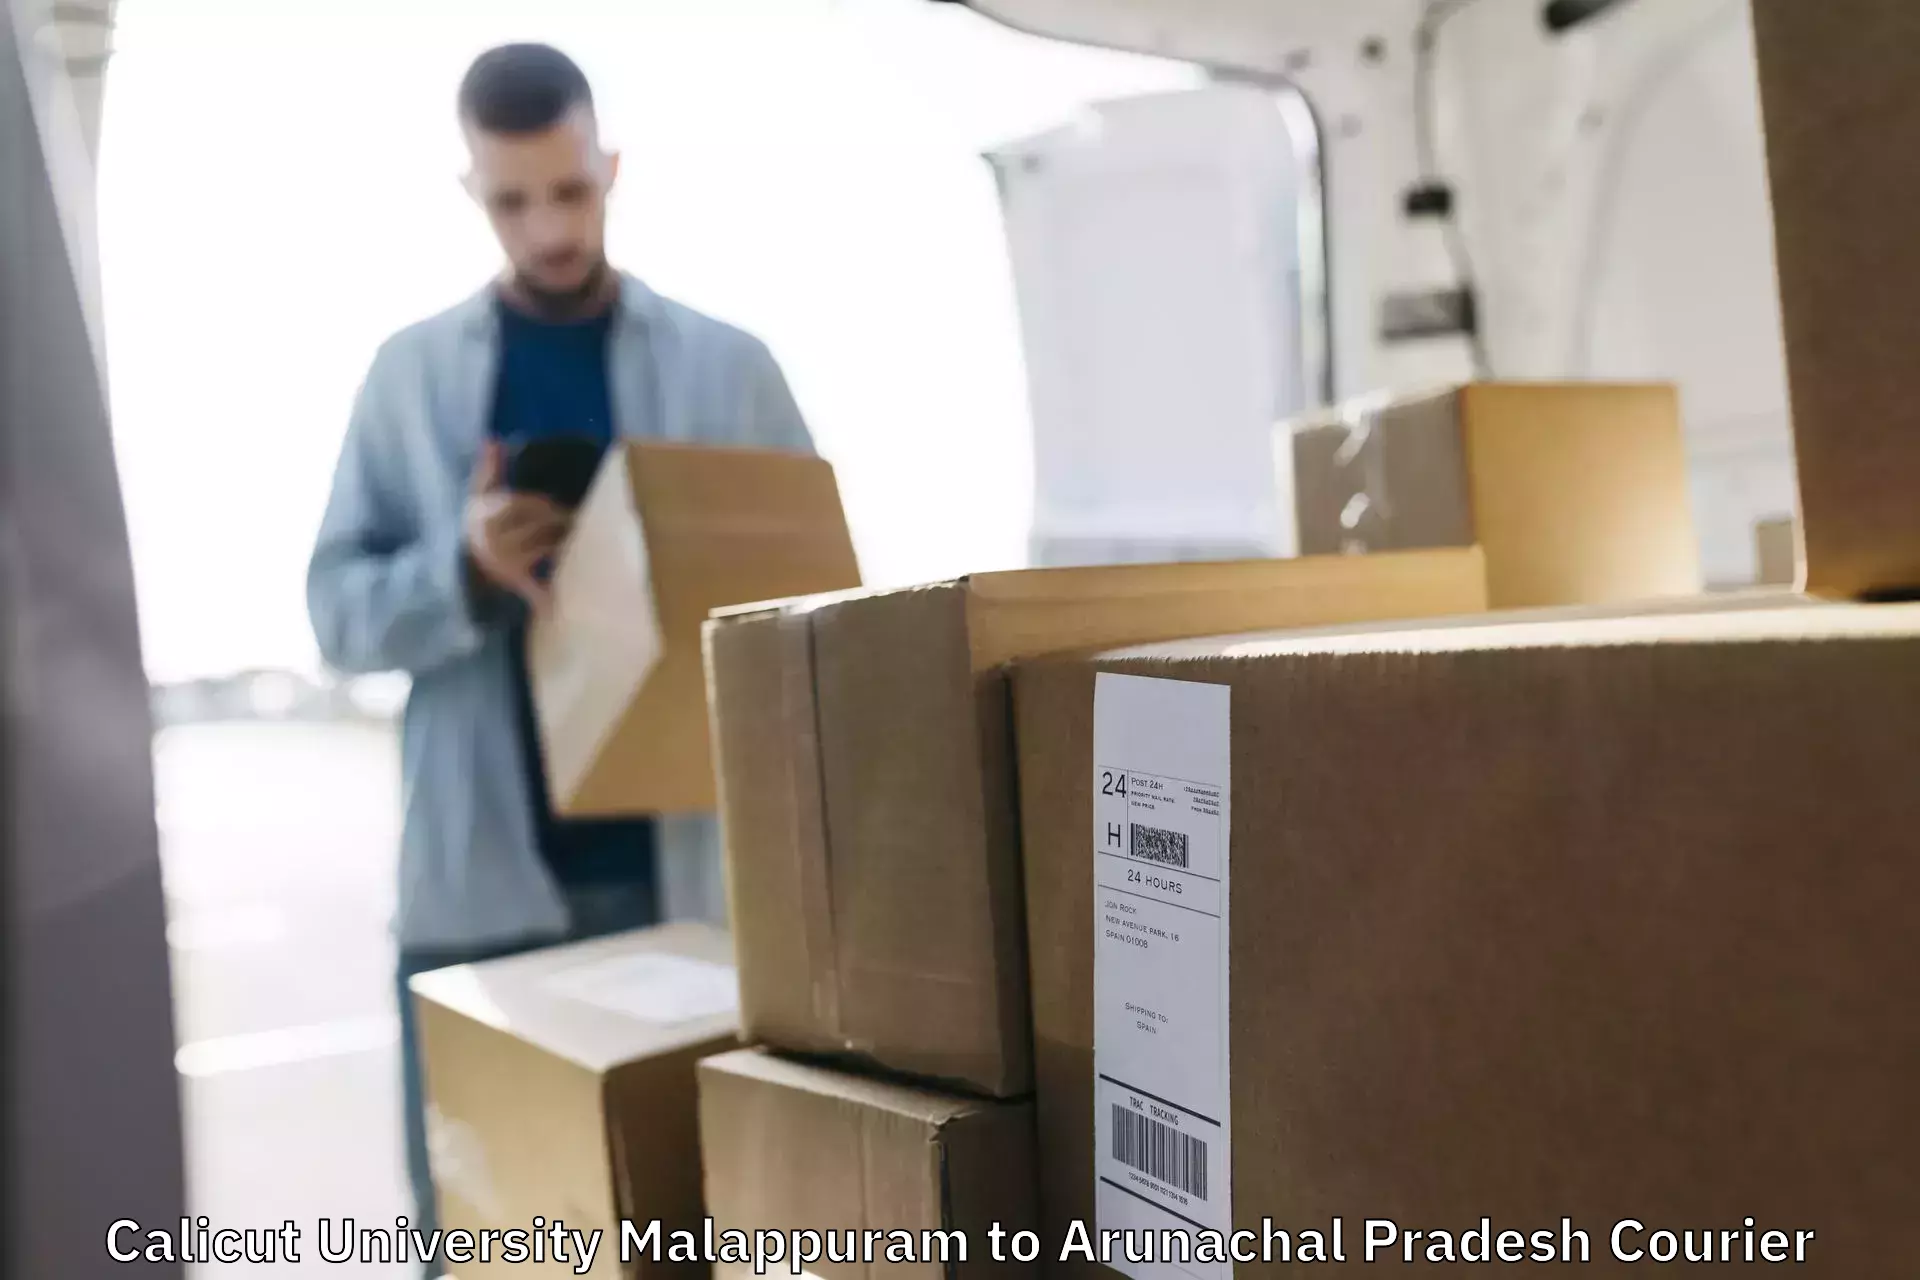 Large package courier in Calicut University Malappuram to Nirjuli